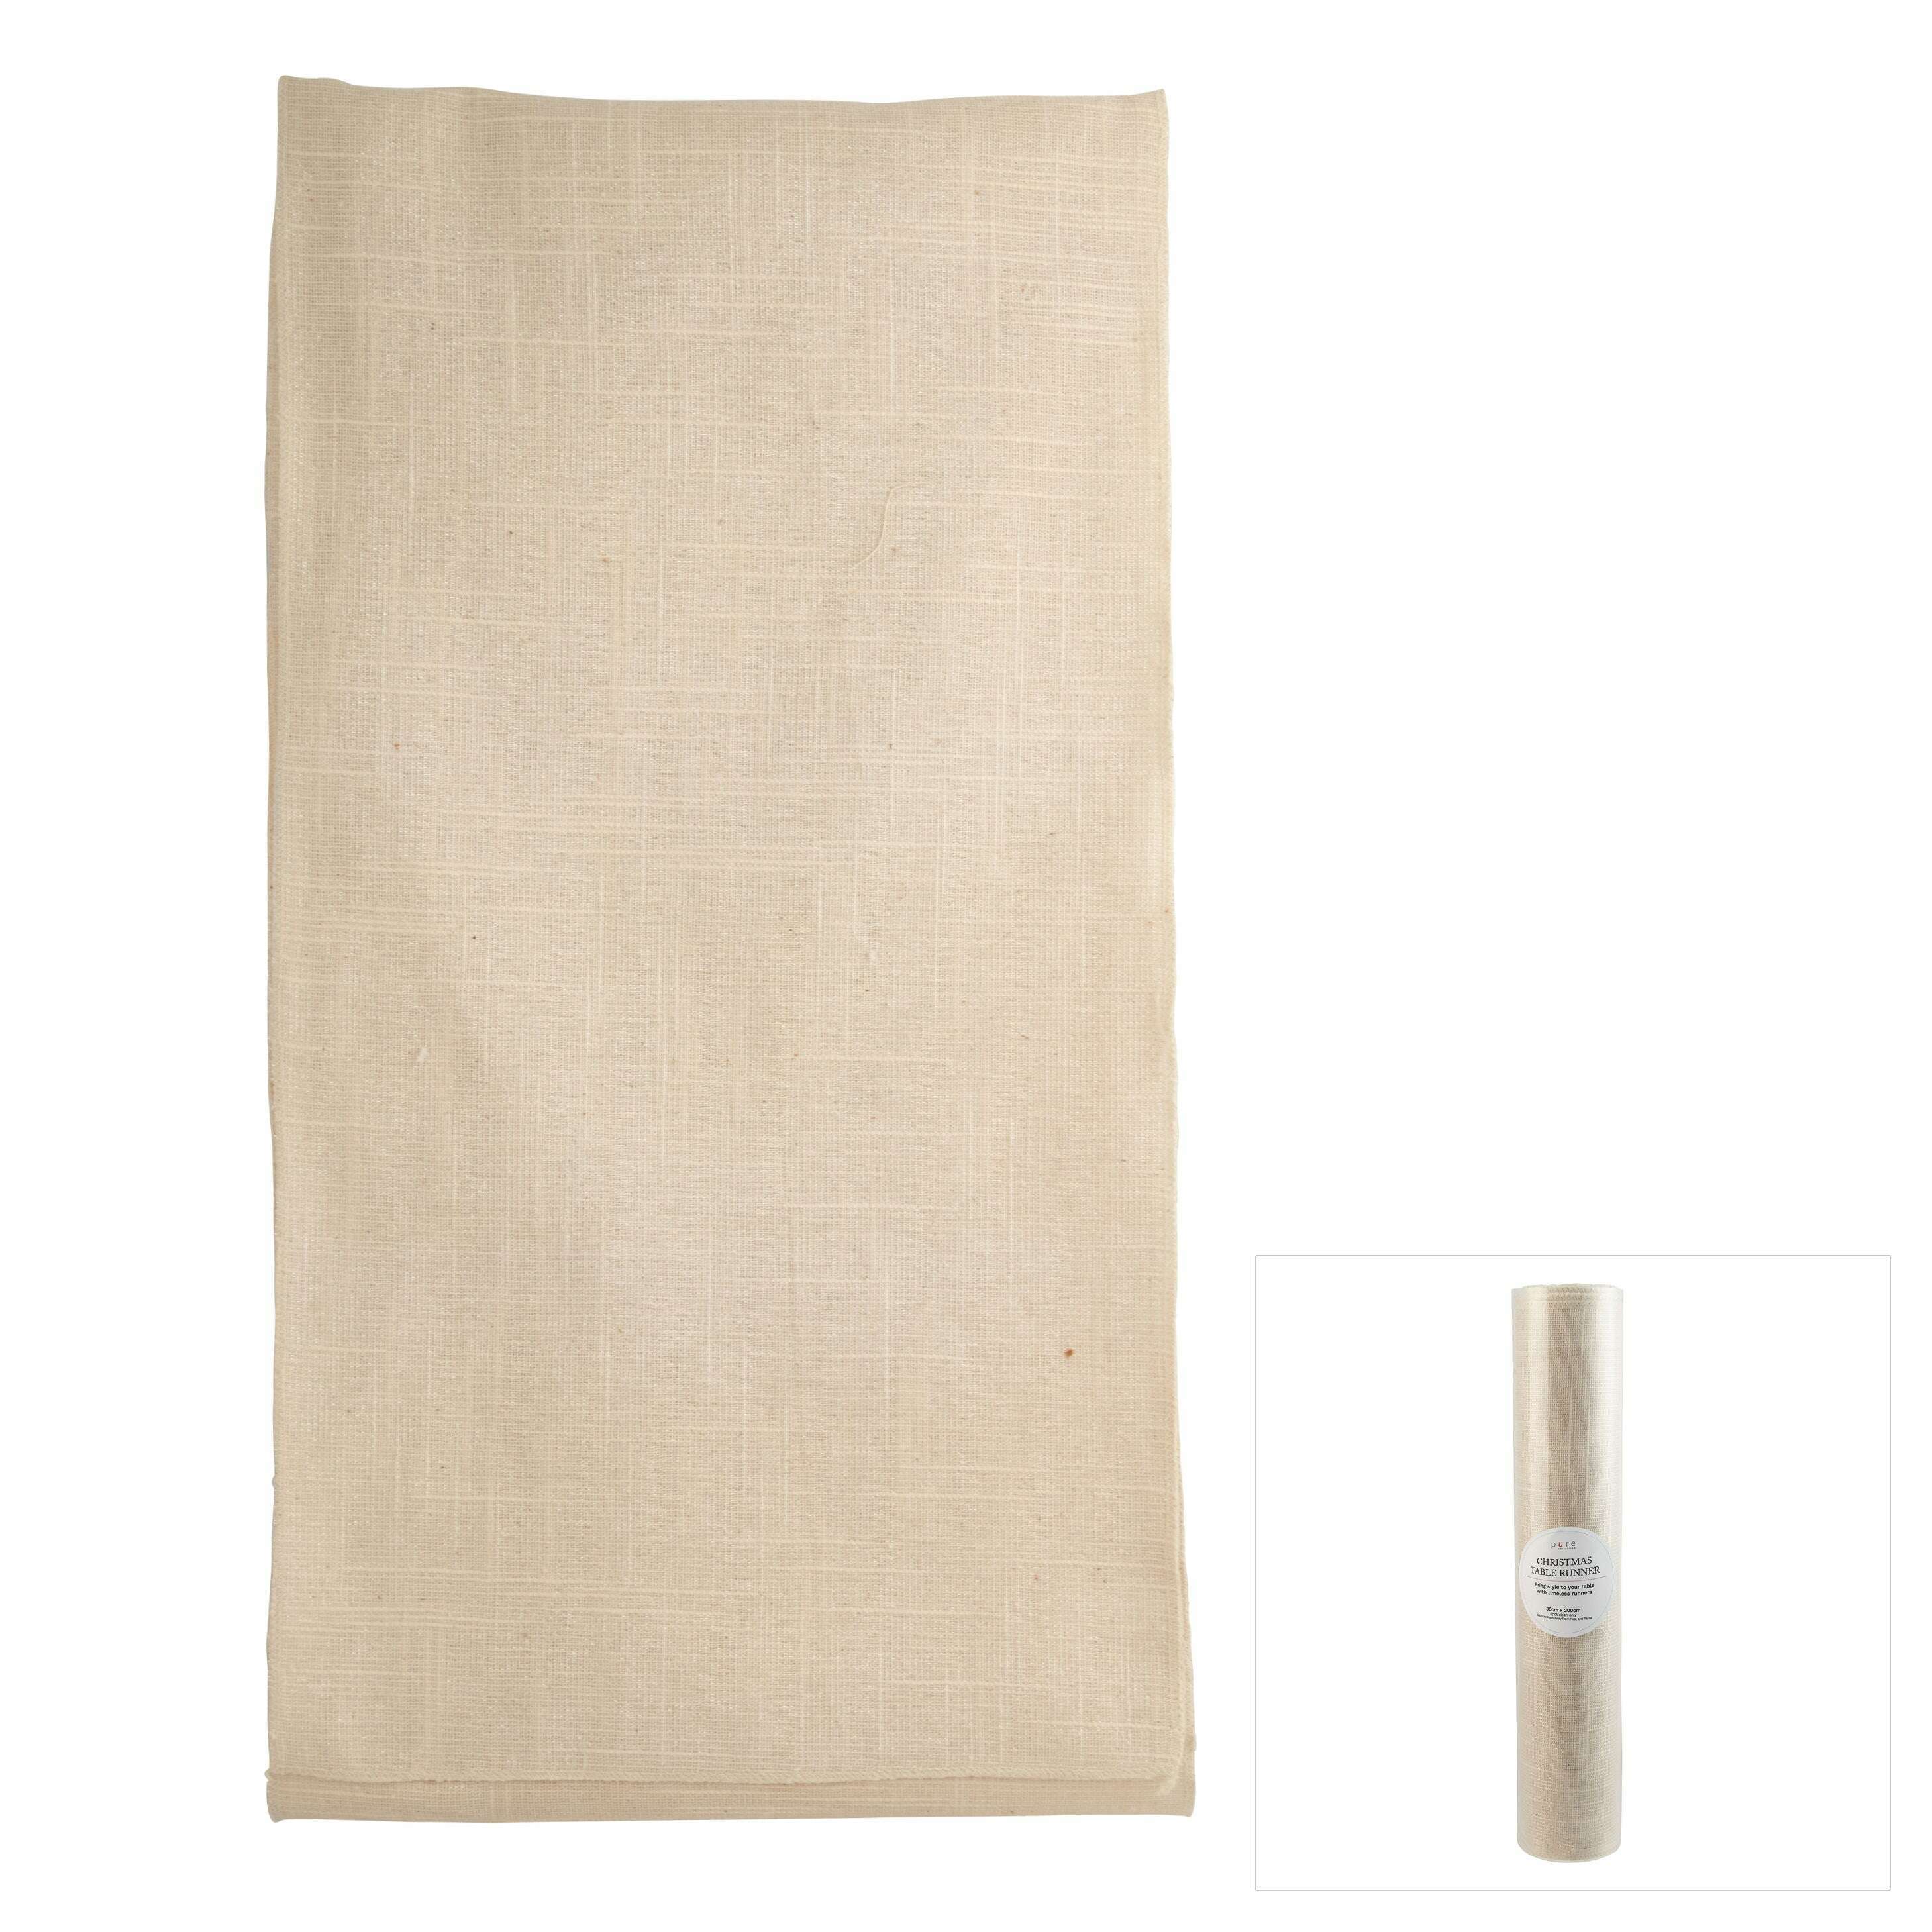 Impodimo Living & Giving:Fabric Table Runner - Natural Champagne:Swing Gifts